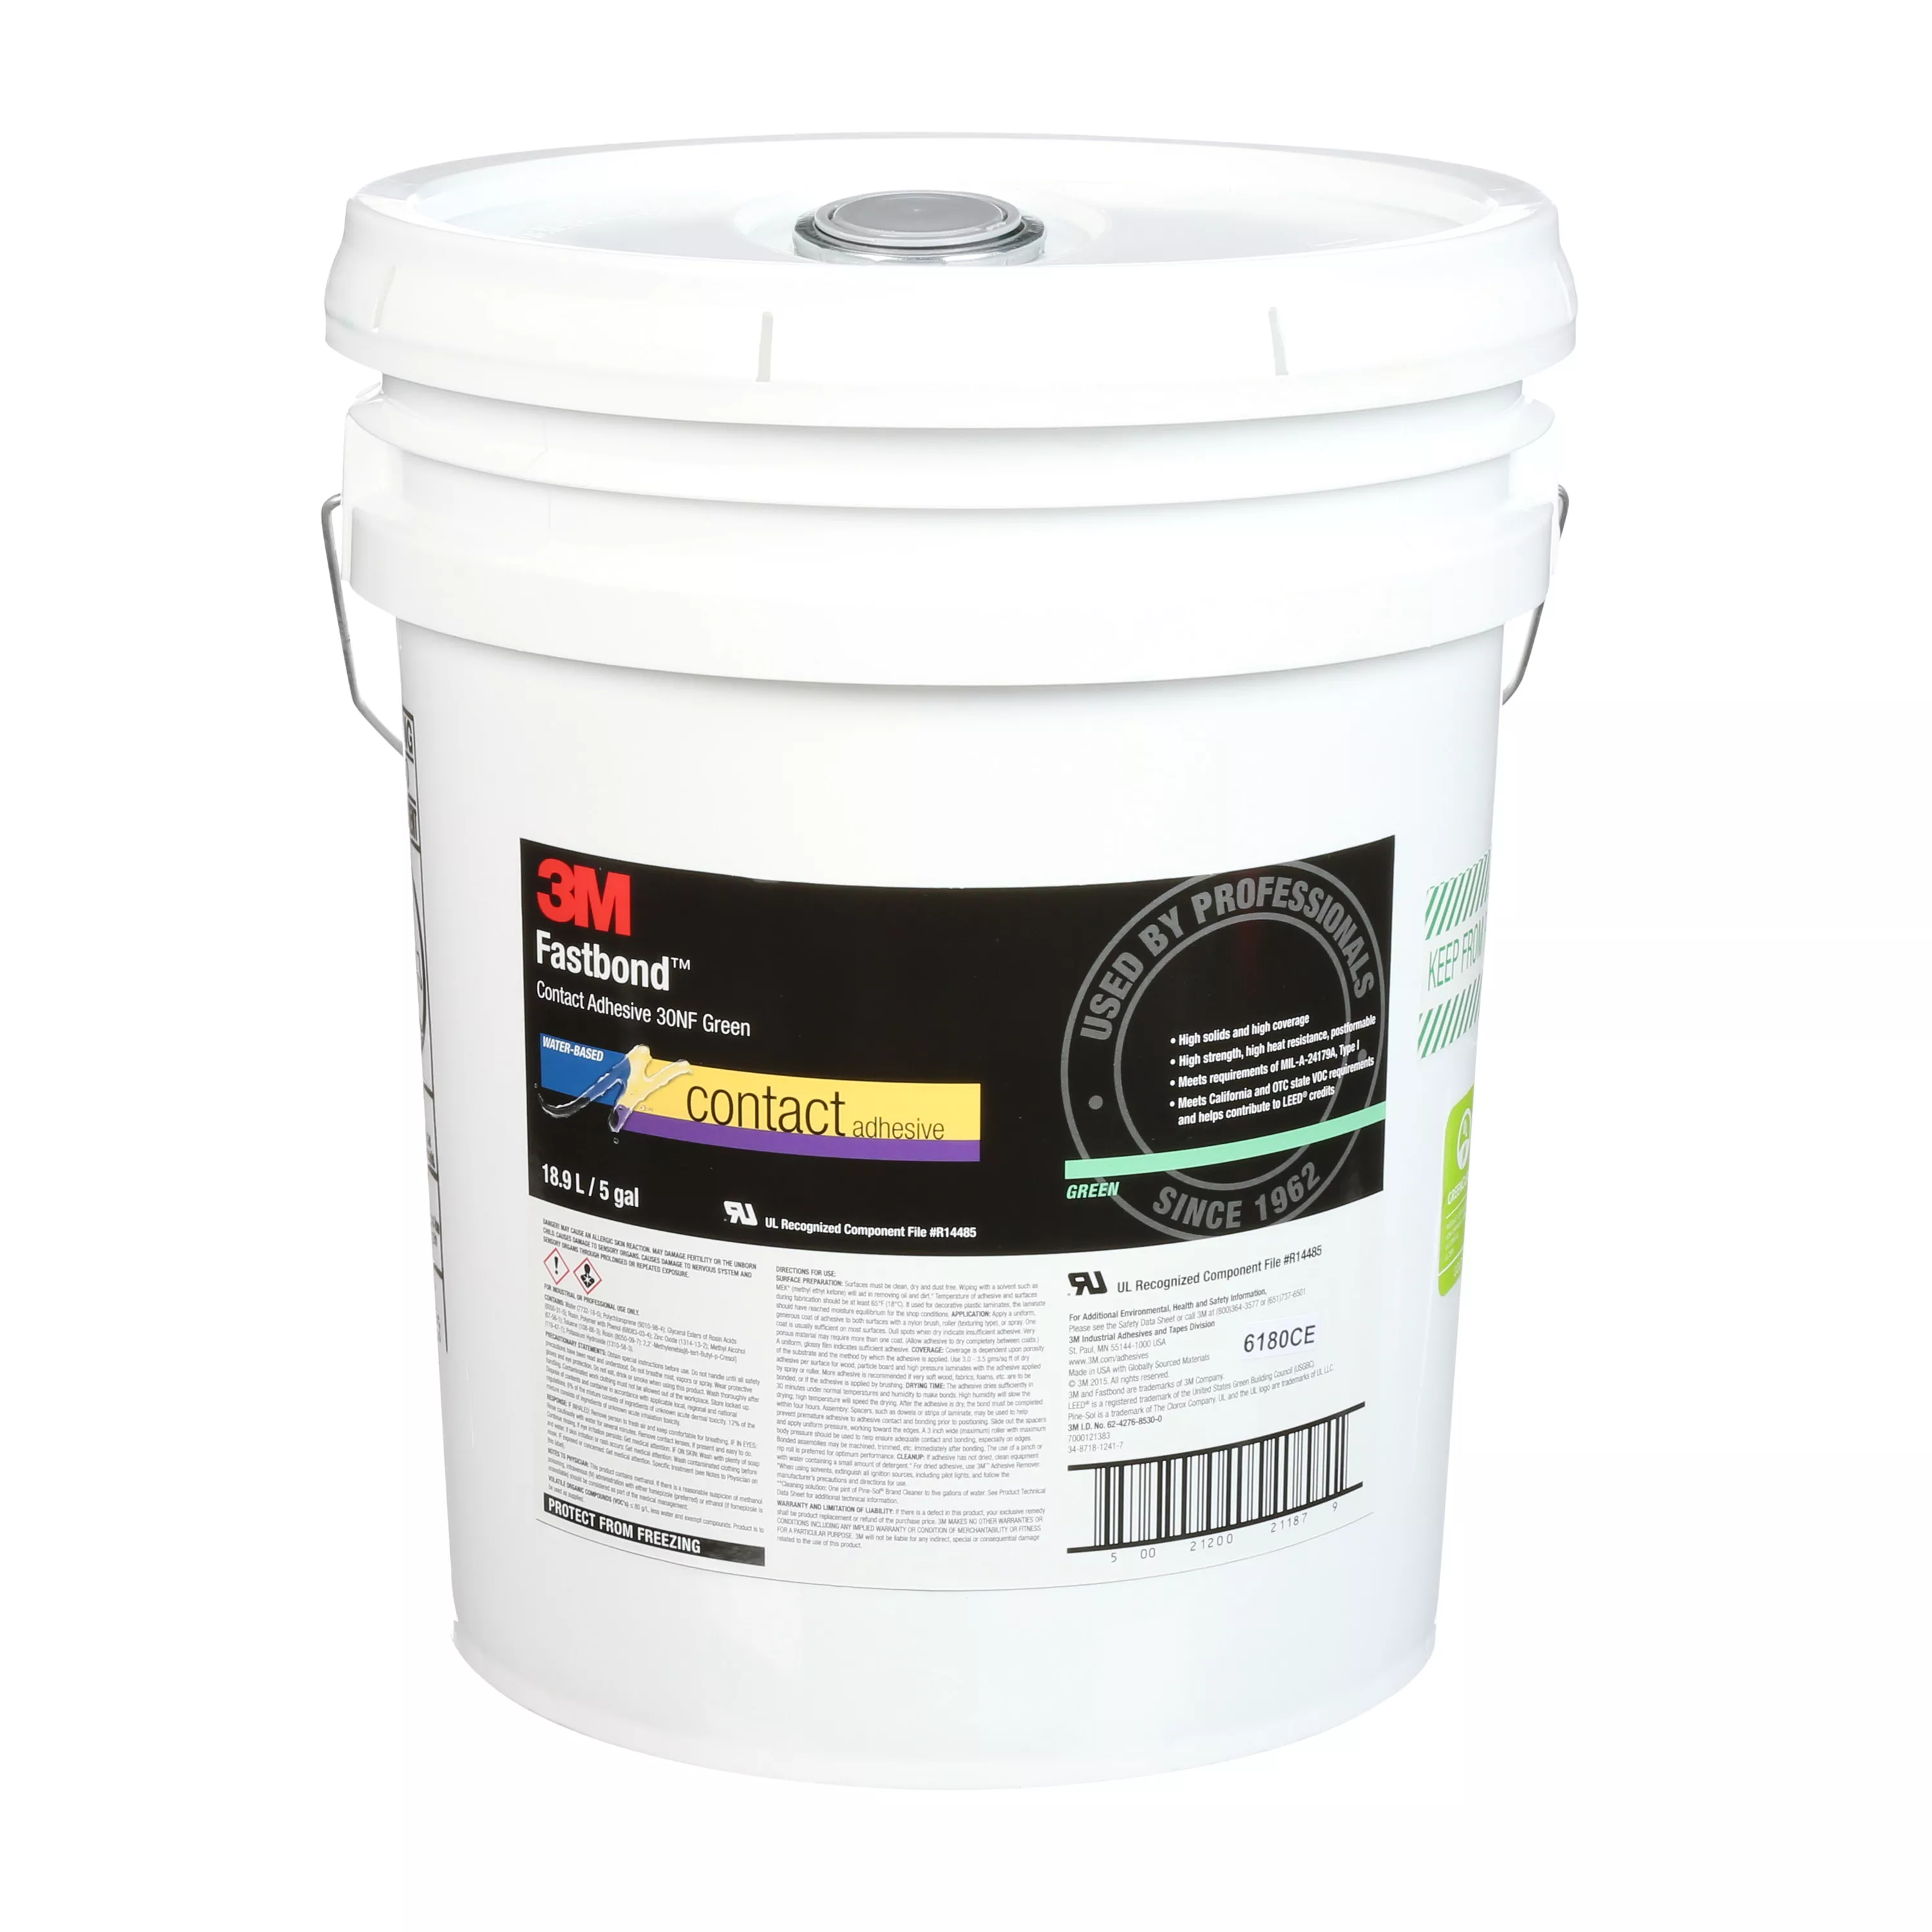 3M™ Fastbond™ Contact Adhesive 30NF, Green, 5 Gallon, 1 Can/Drum